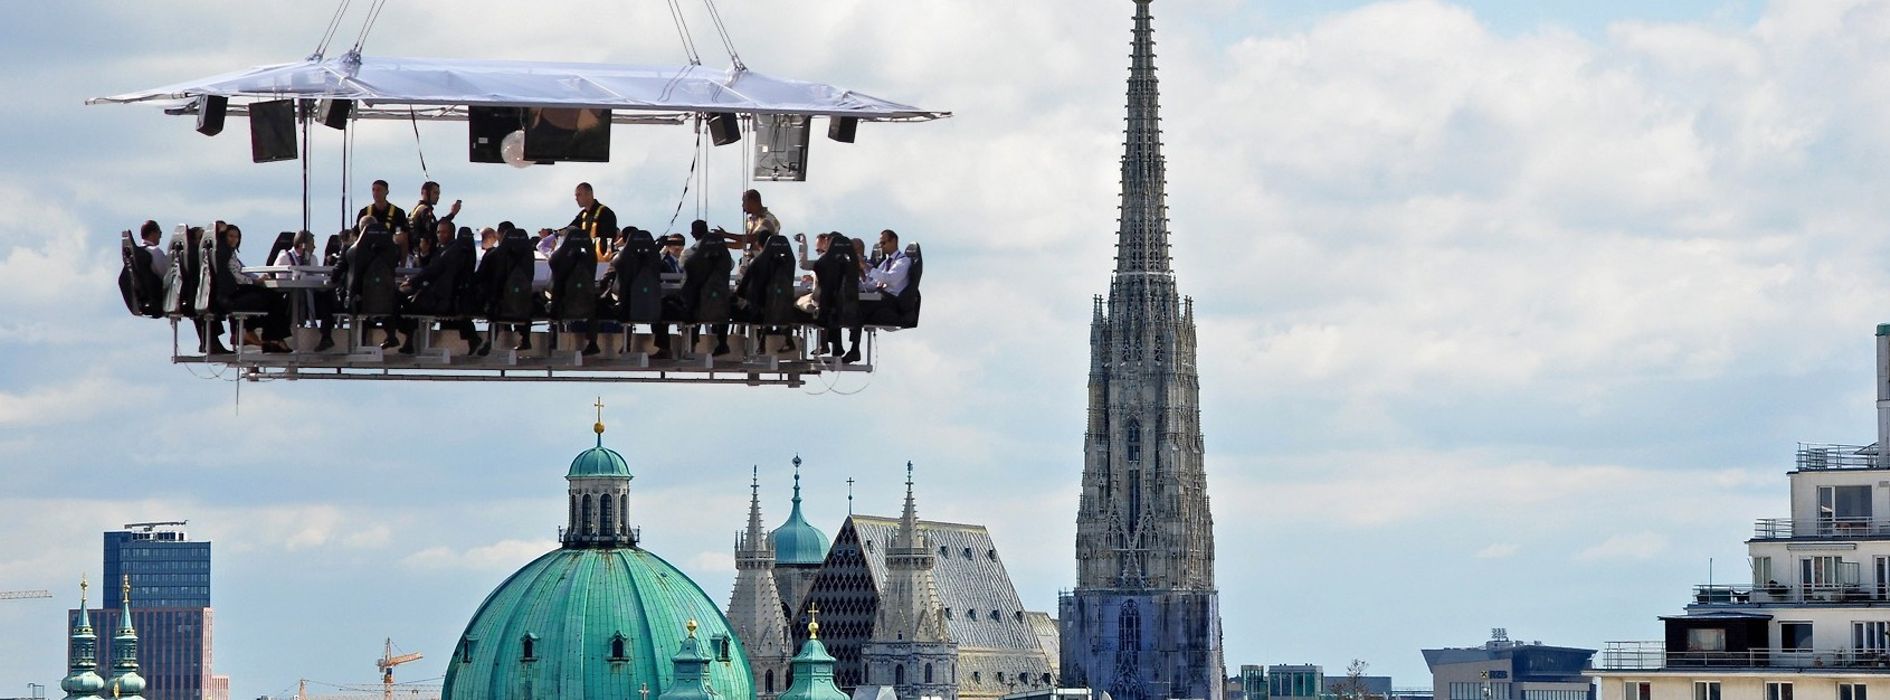 Dinner in the sky with St. Stephen's Cathedral in the background